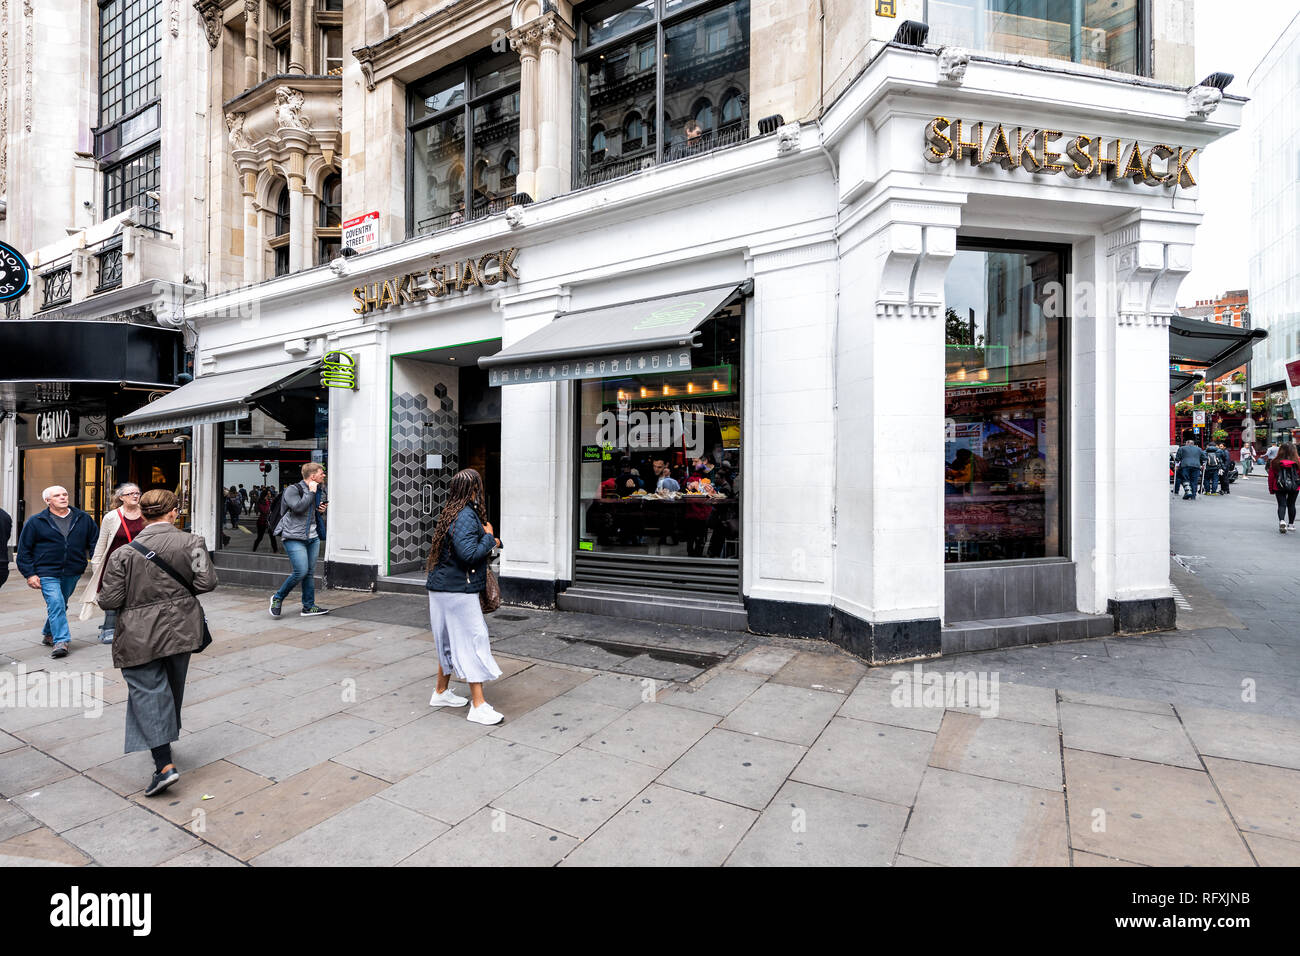 London, UK - September 12, 2018: Sidewalk street shopping at Leicester Square stores during day in city with Shake Shack restaurant Stock Photo